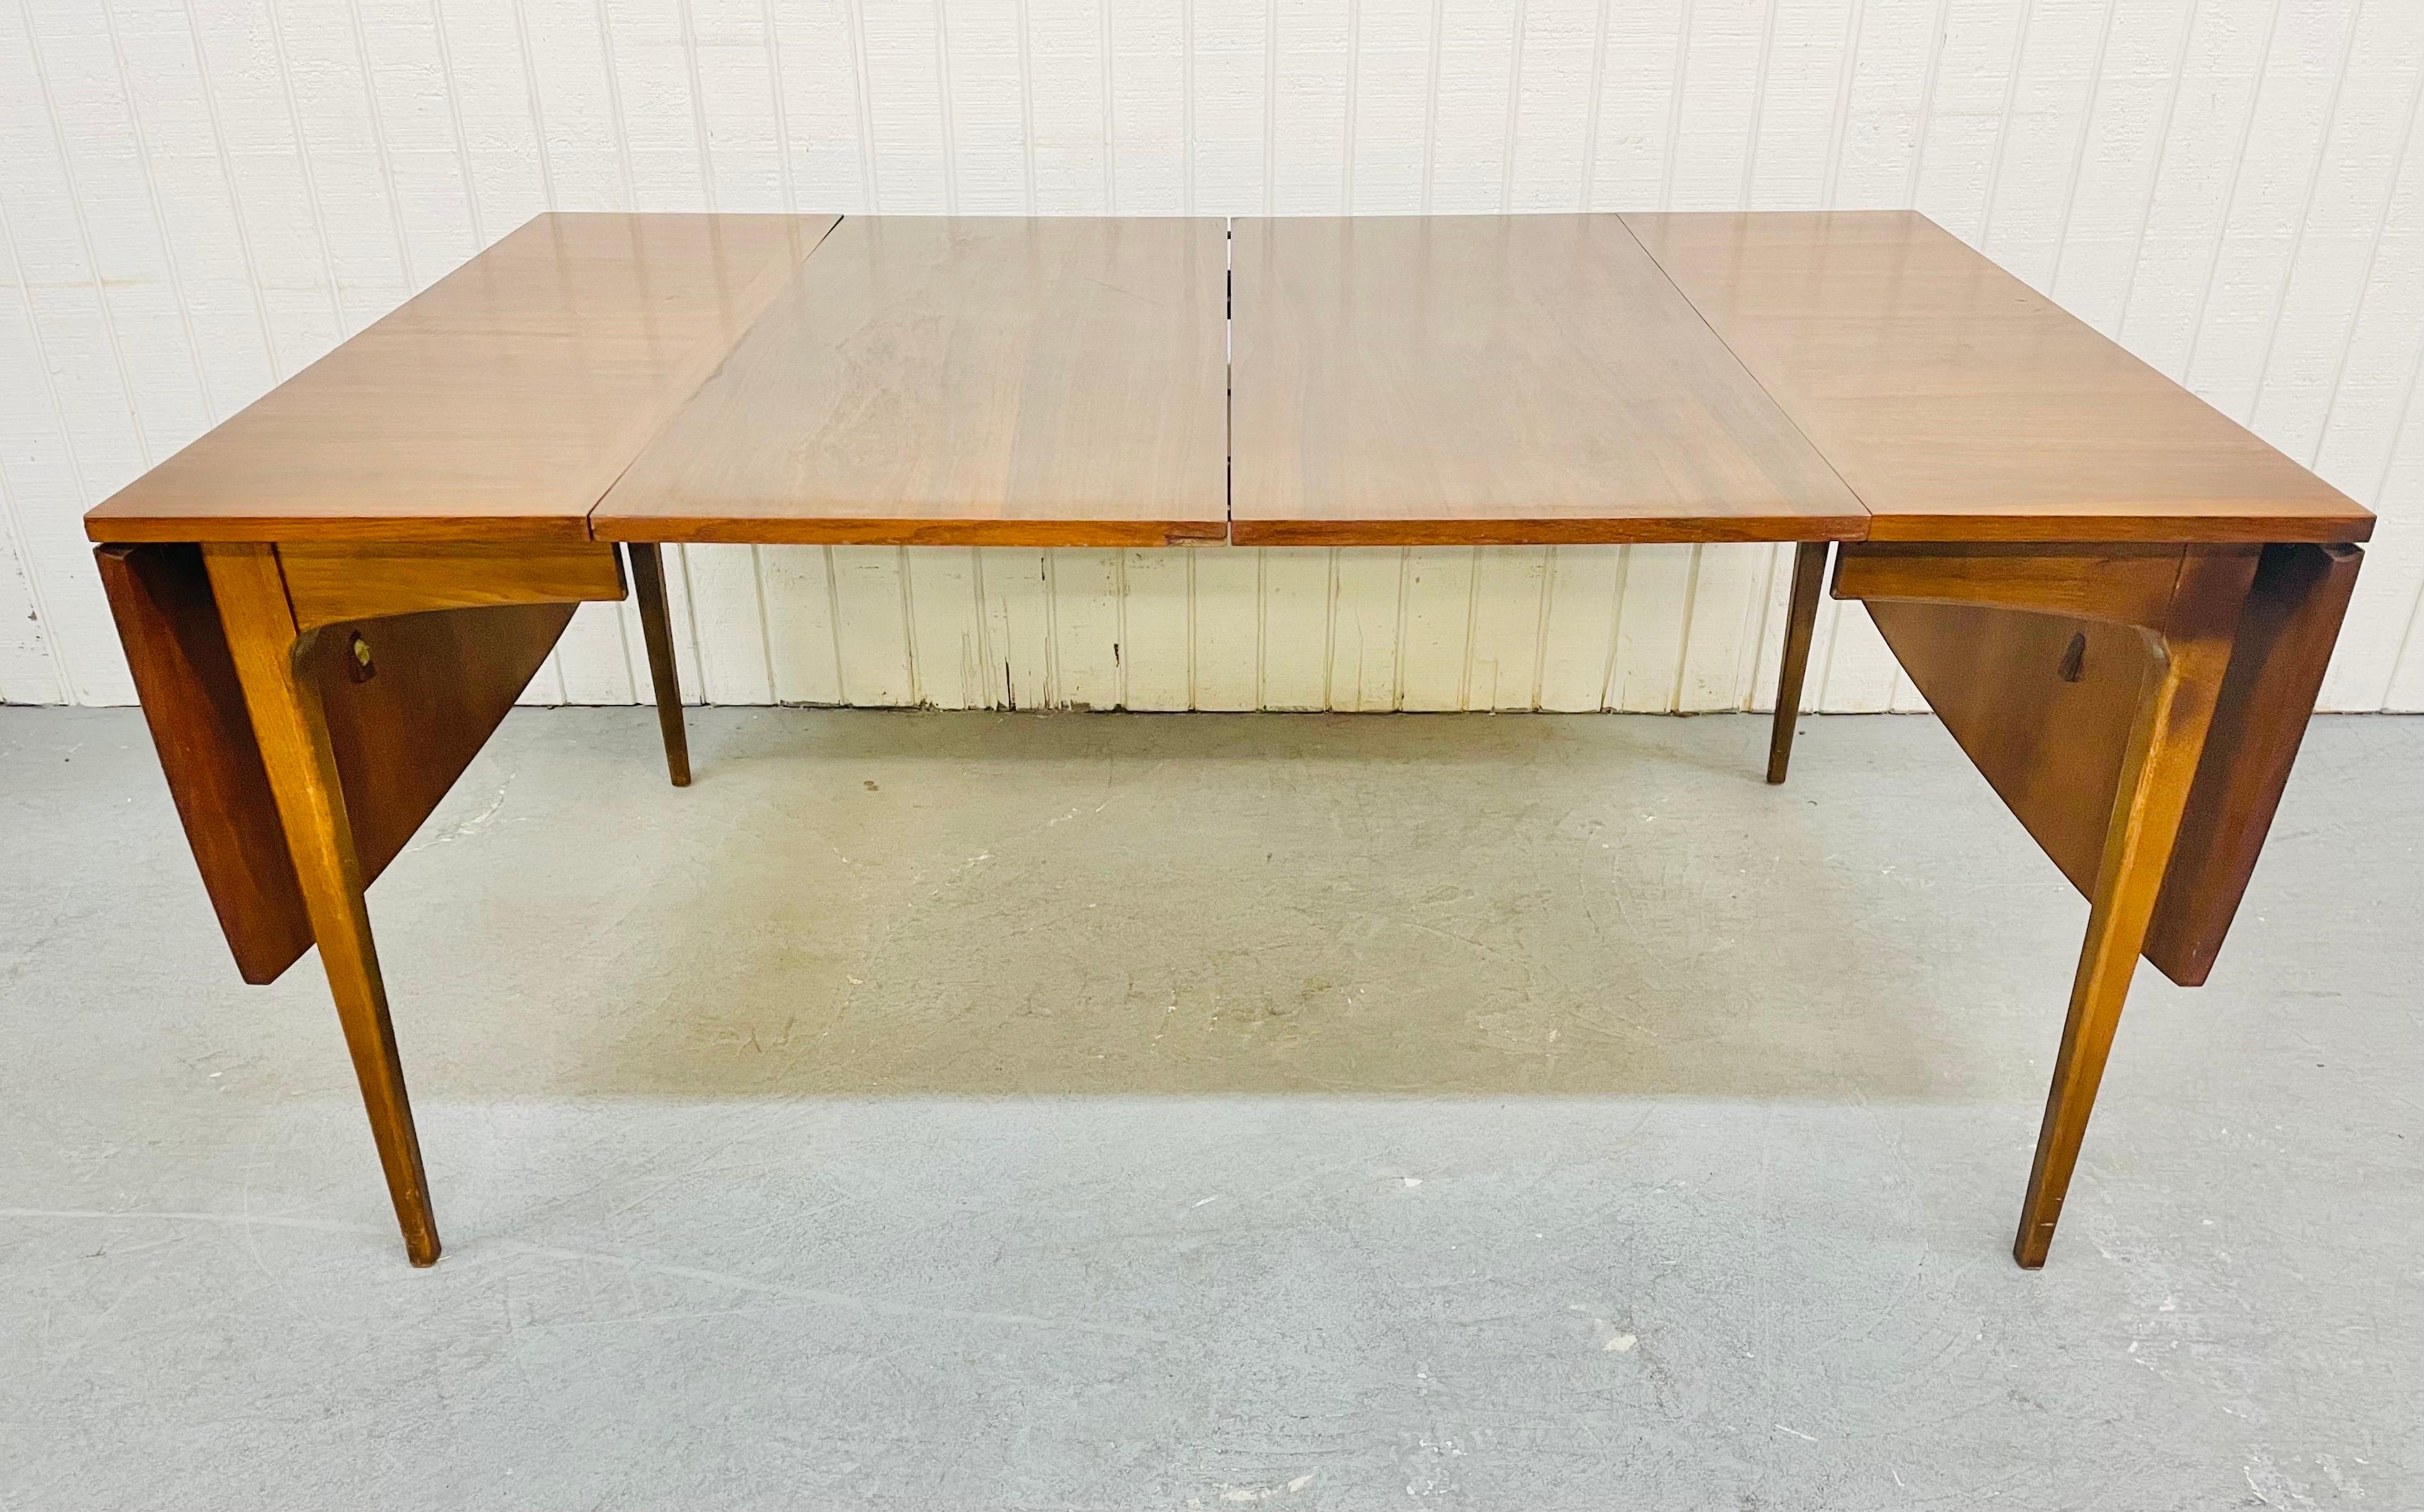 This listing is for a Mid-Century Lane Rhythm Walnut drop-leaf dining table. Featuring two drop leaf sides that extend the table from 28” to 62” L , two original 18”leaves that extend the table up to 98” L, and a beautiful walnut finish.